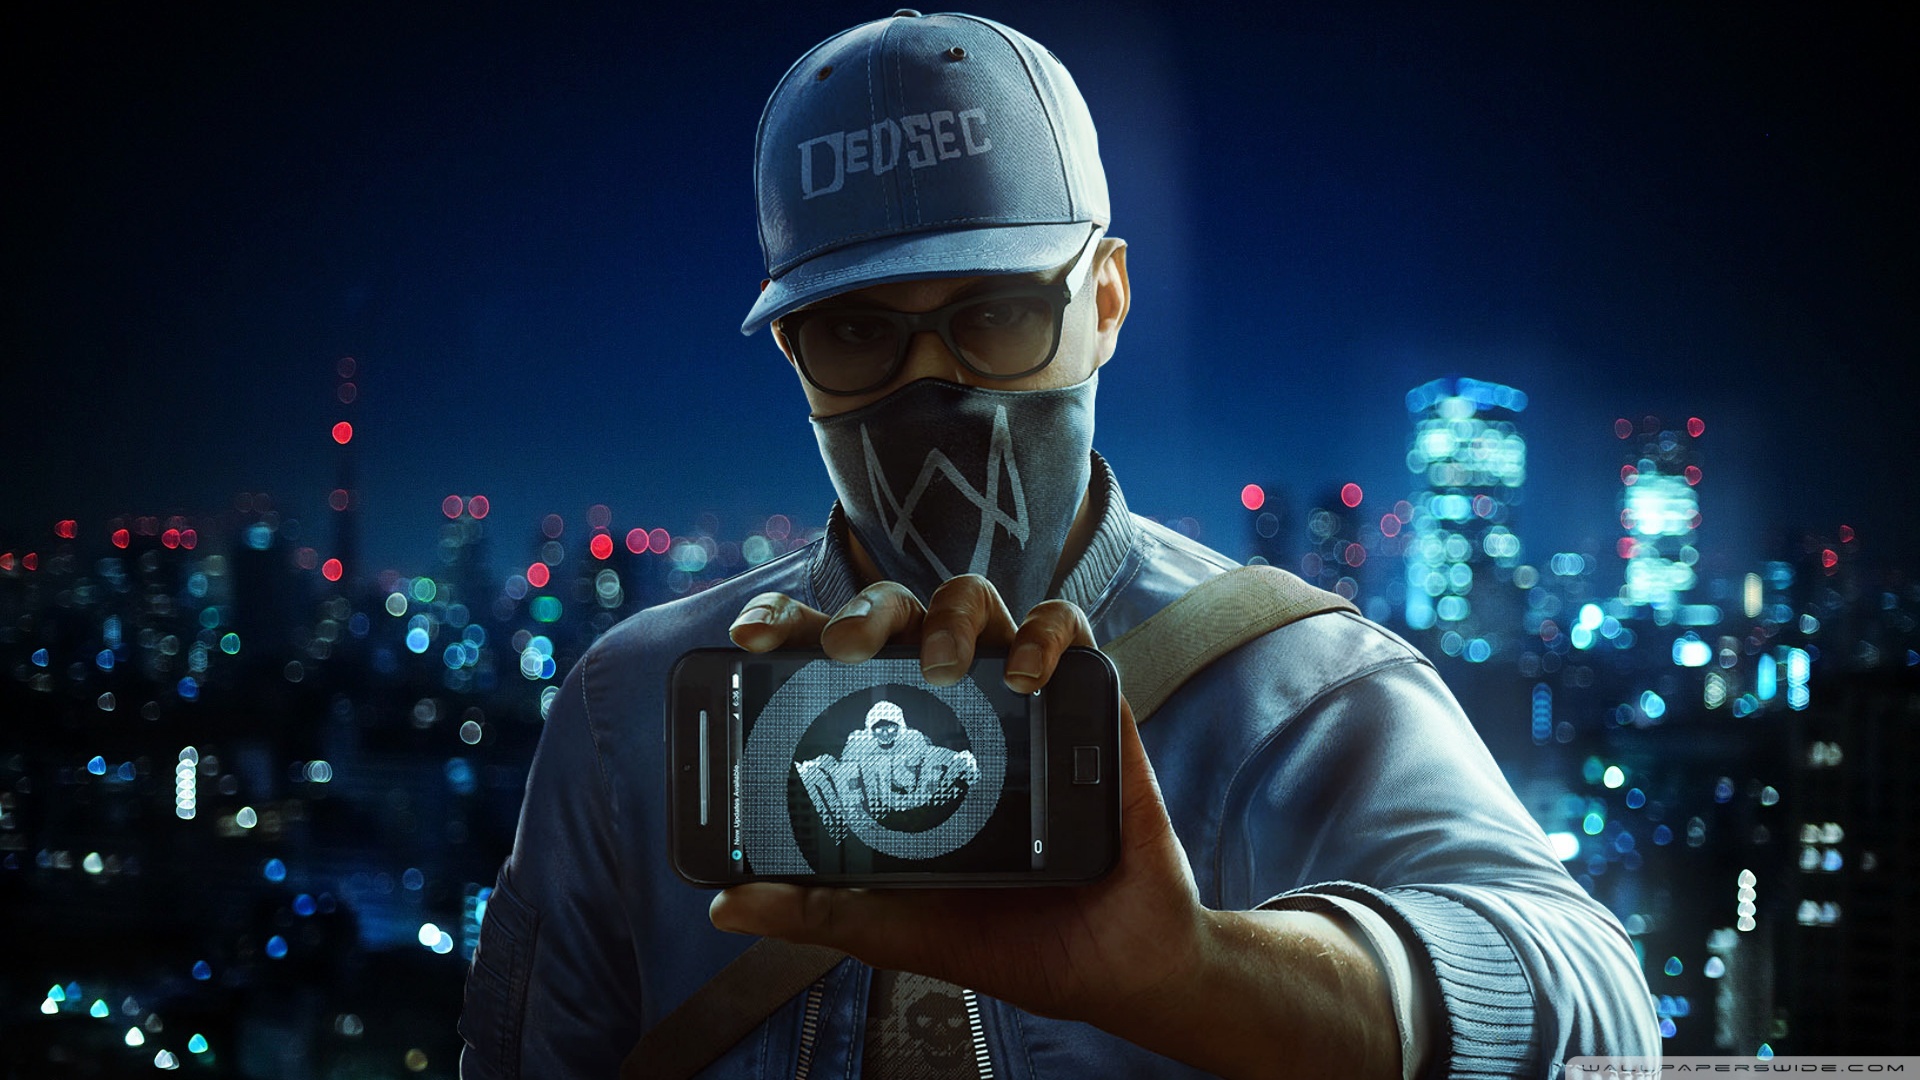 Watch Dogs 2 Marcus - 1920x1080 Wallpaper 